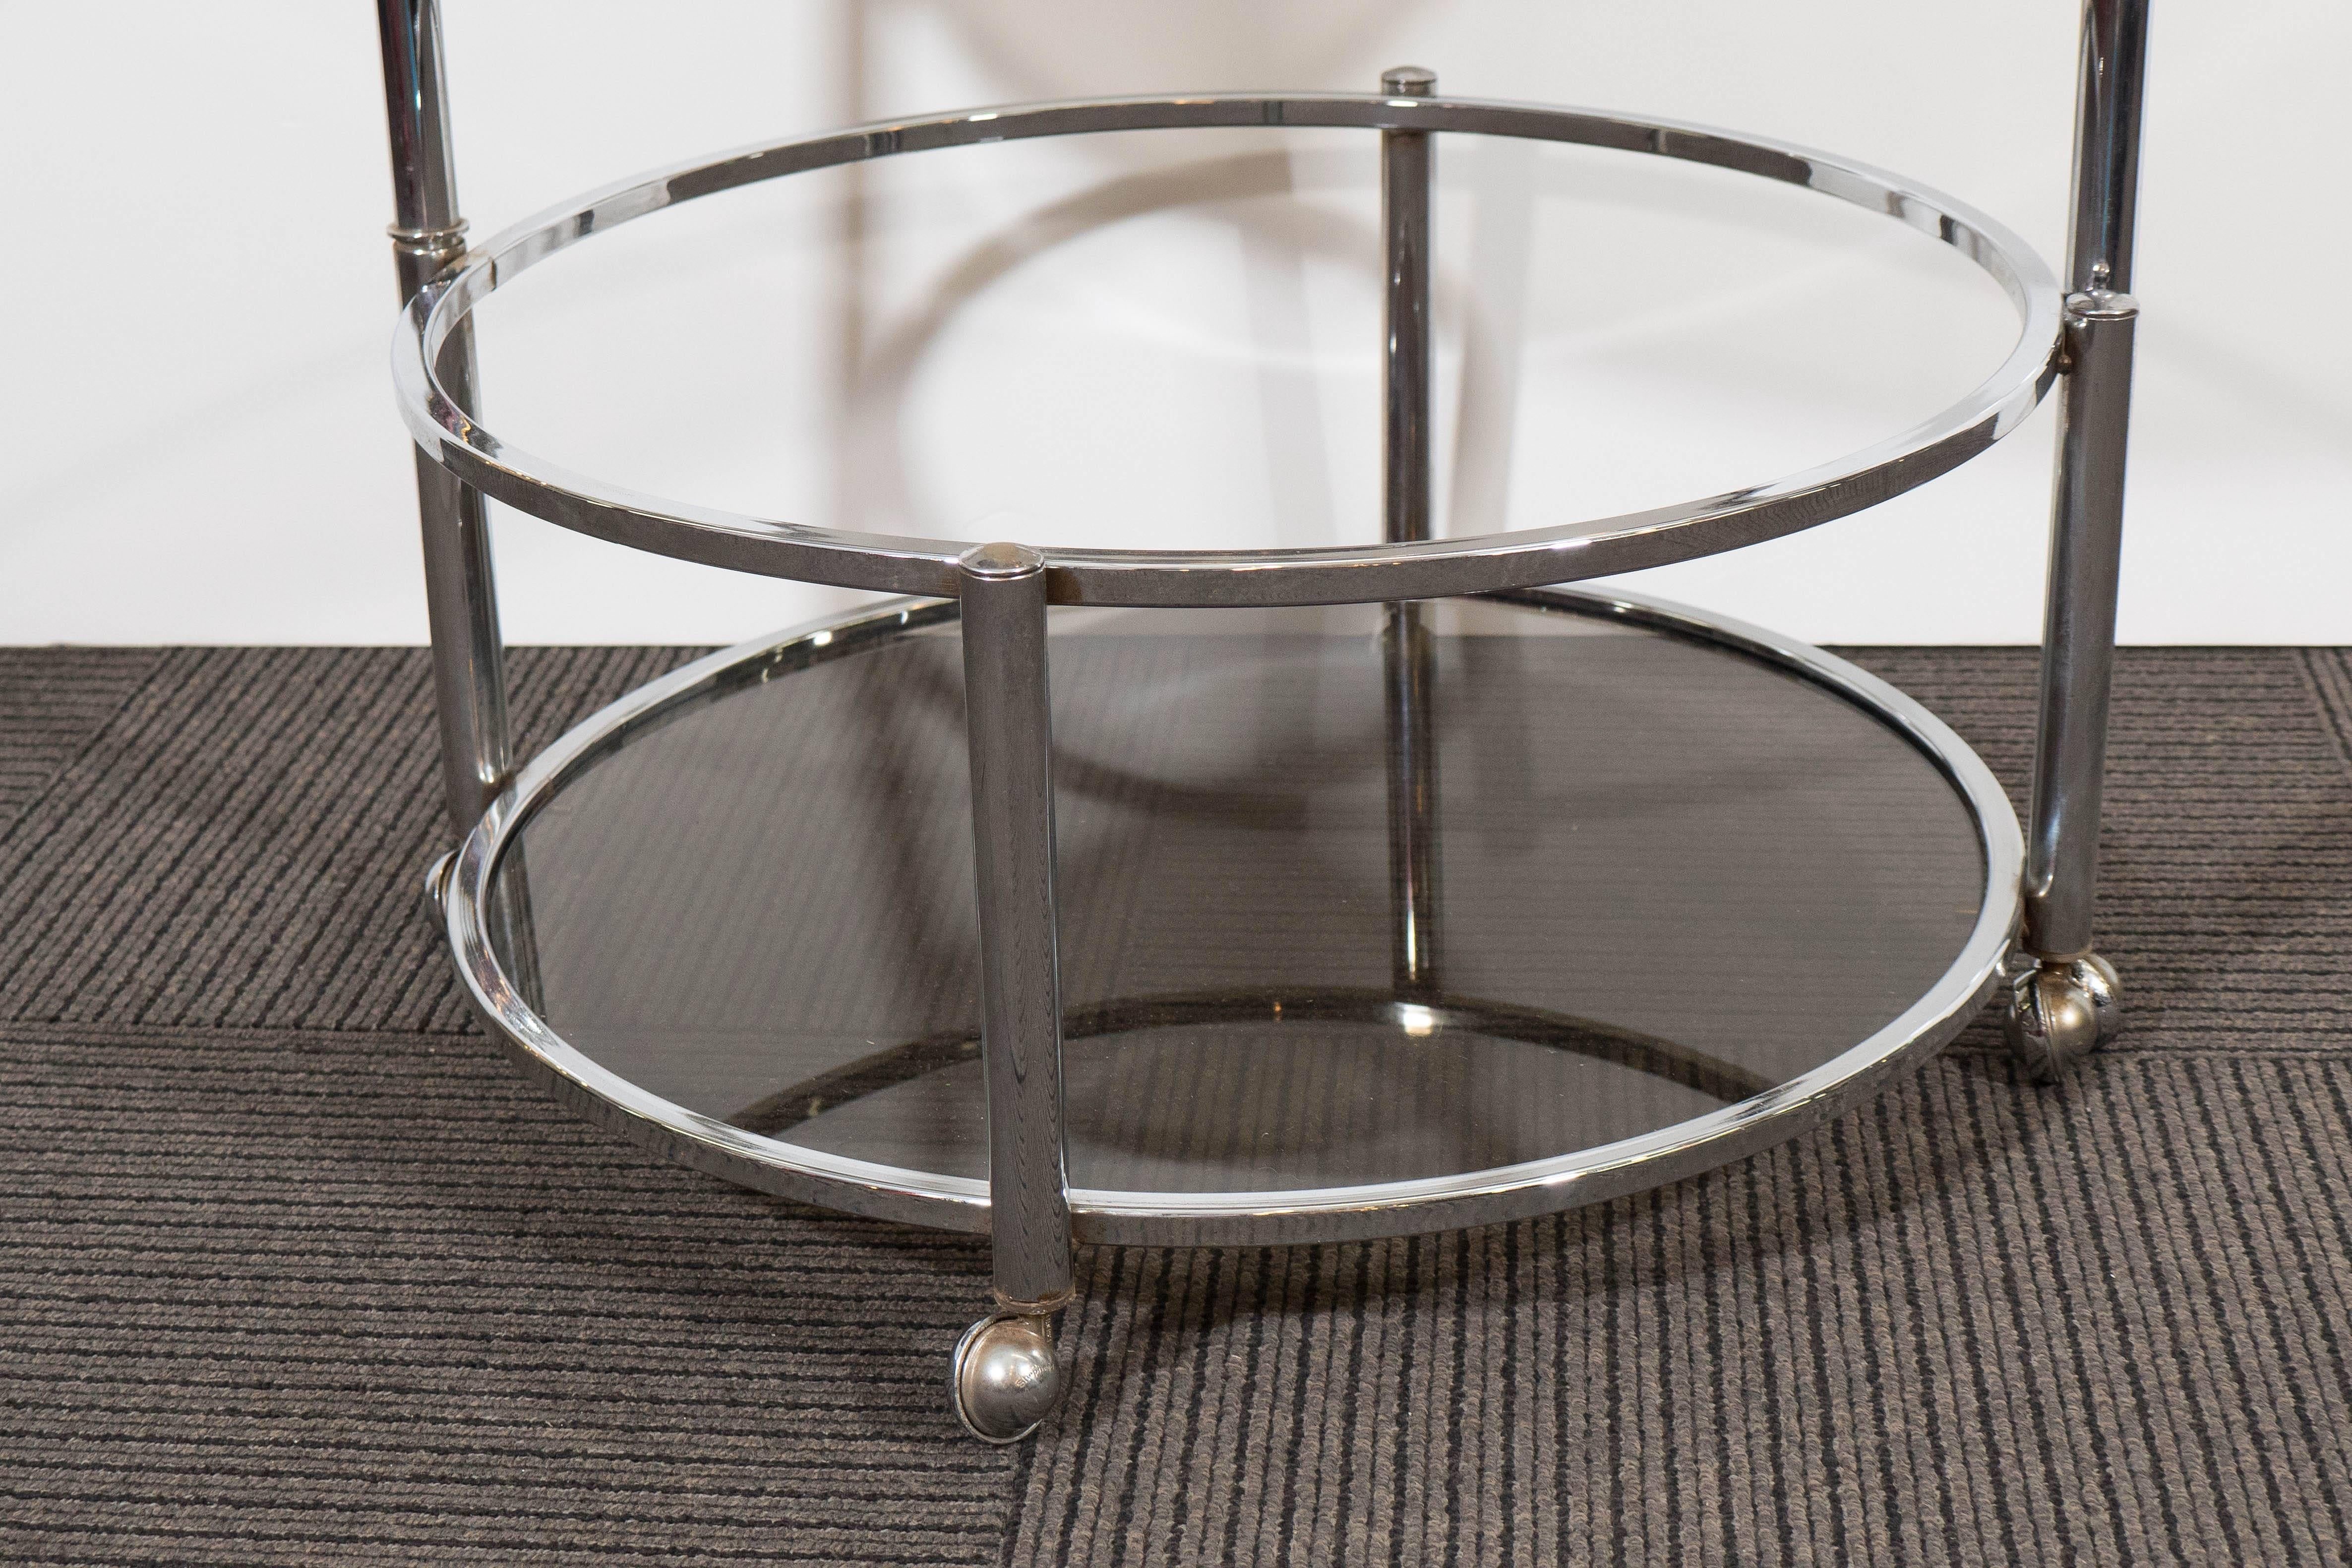 A vintage circa 1970s round occasional table, with two shelves of smoked glass tiers, against an adjustable, beautifully polished chrome frame on casters; the central ring acts as a handle, permitting the bottom shelf to swivel outwards. Very good